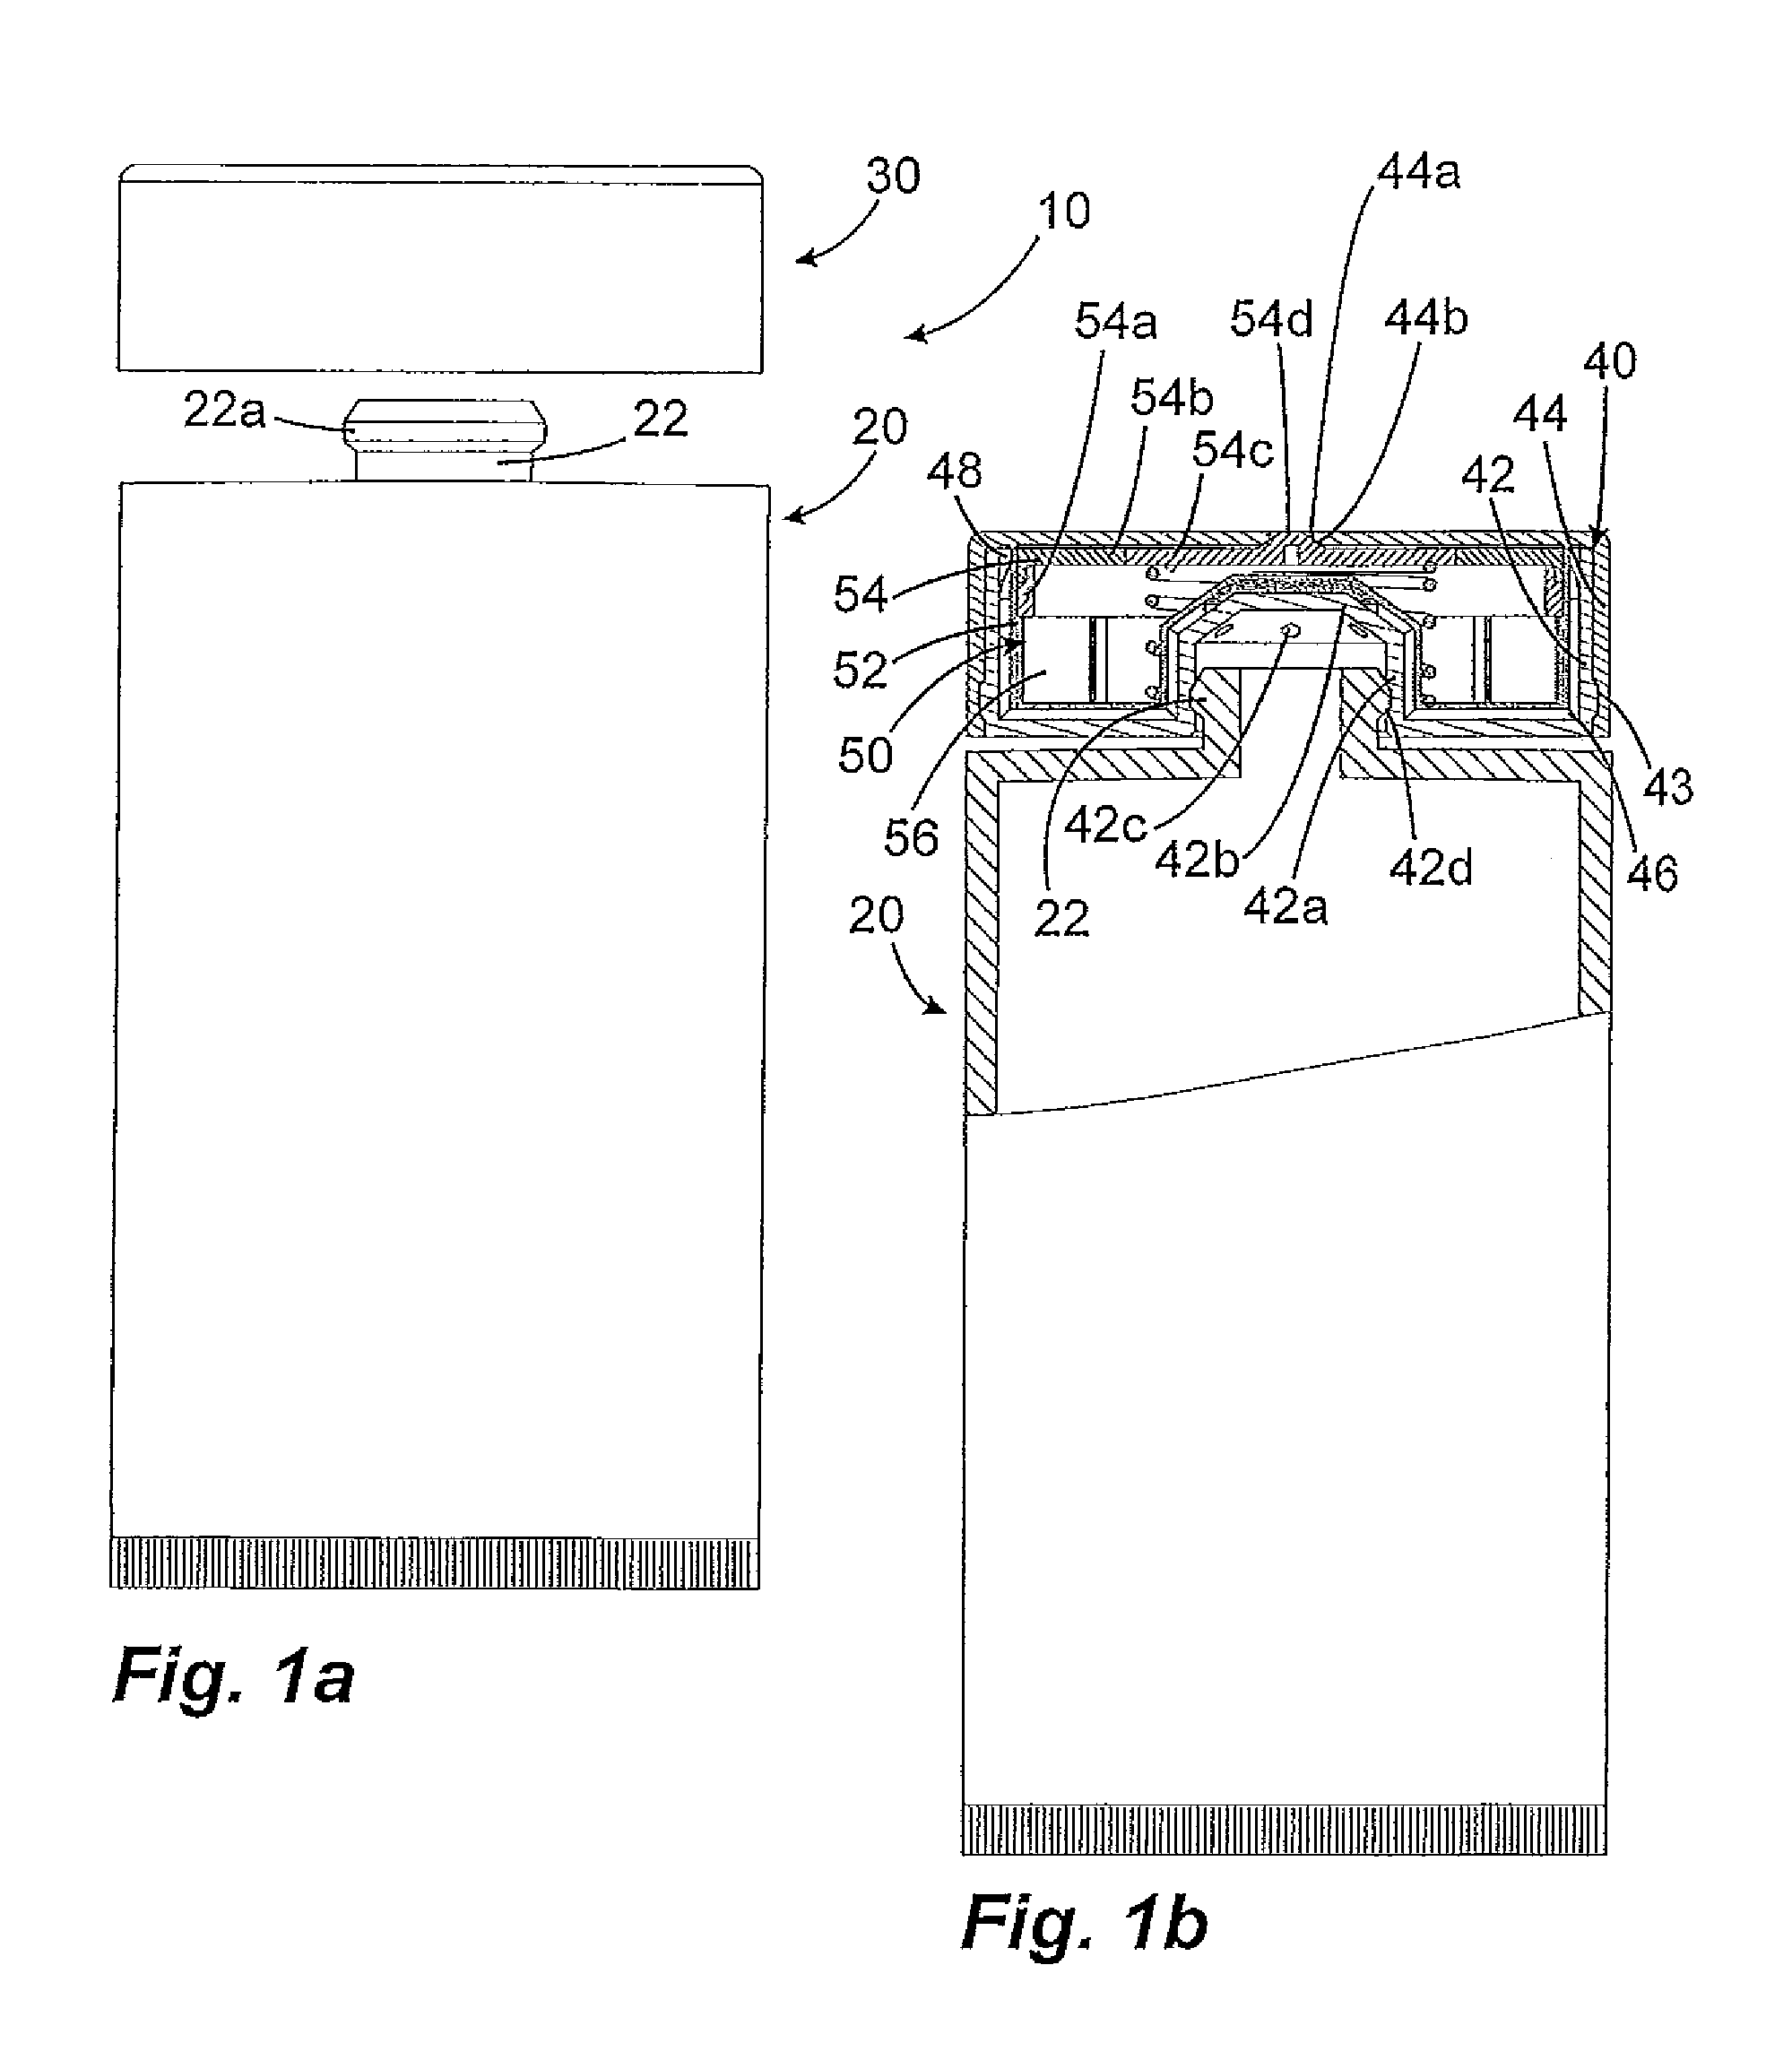 Dispensing head for a tube and tube having a dispensing head